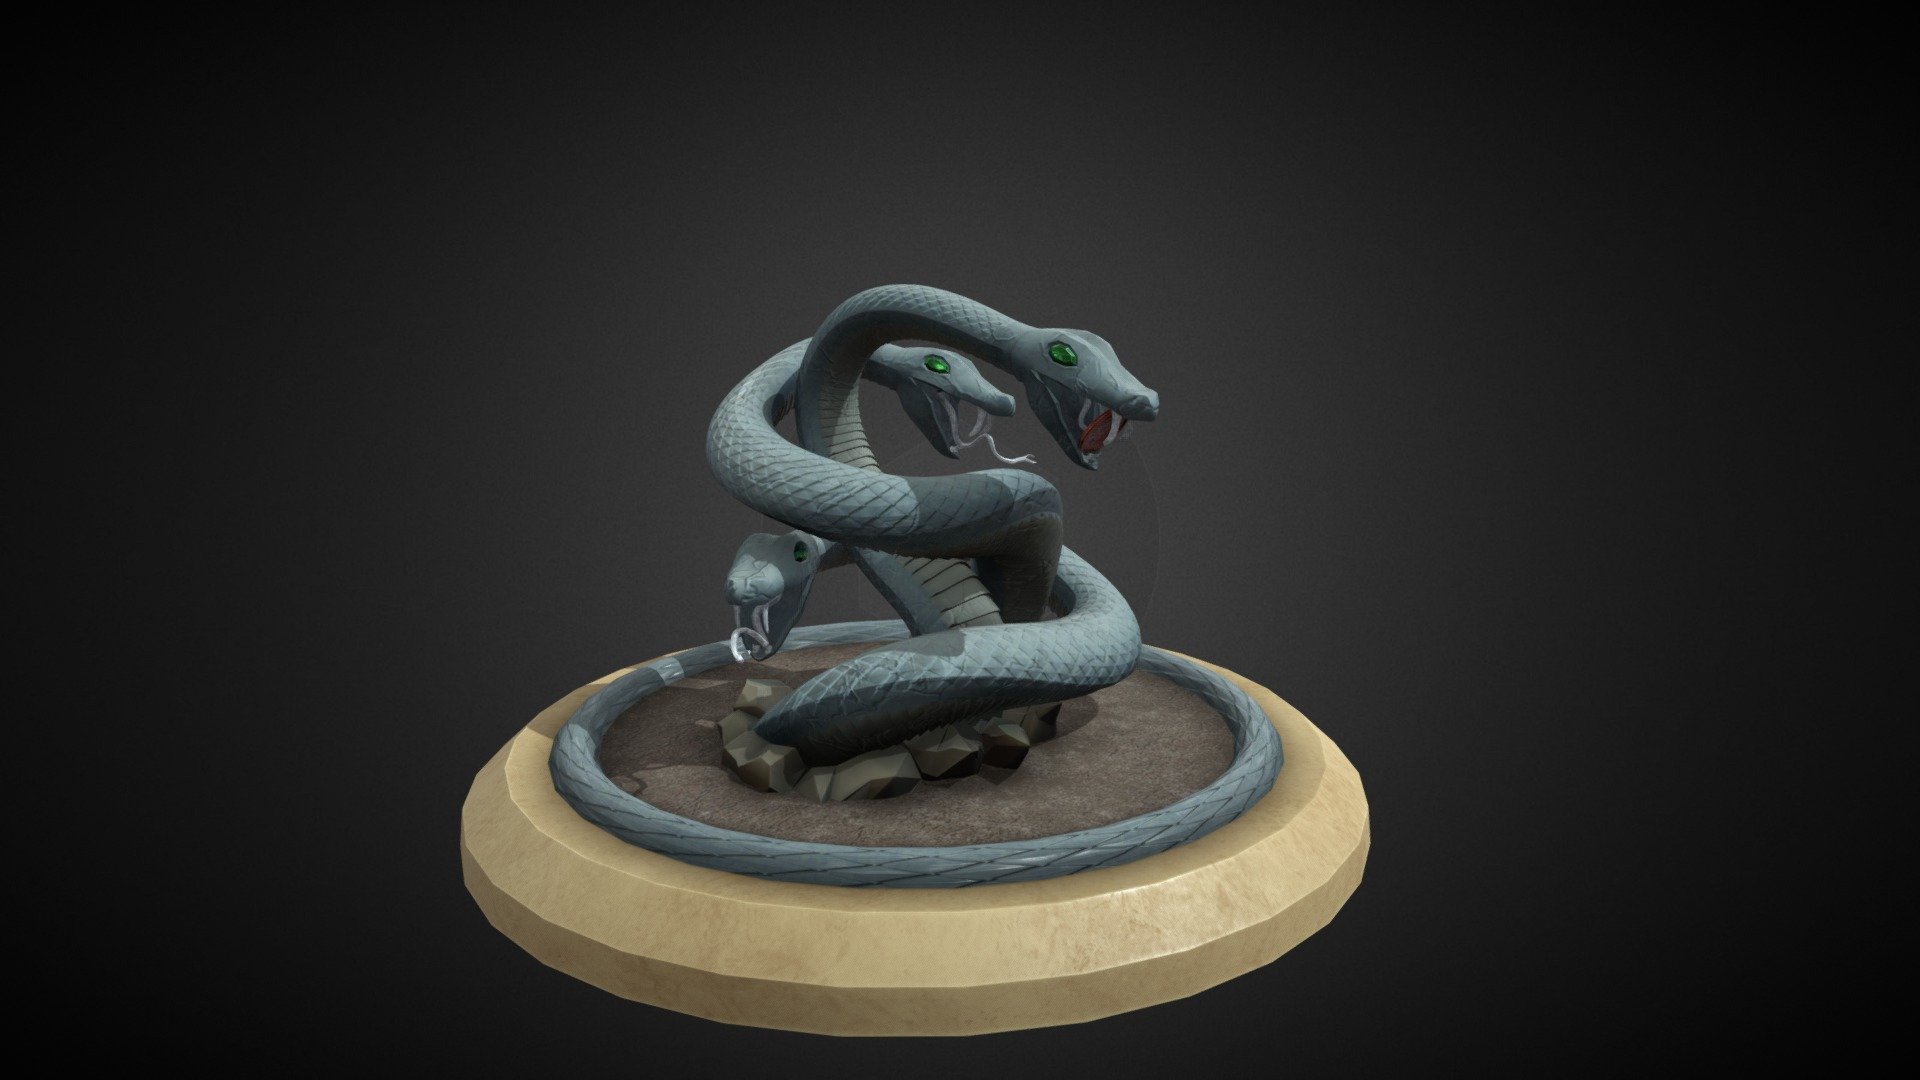 A statue of a hydra, emerging from the ground.

Modelled in Blender, and textured in Substance Painter 3d model